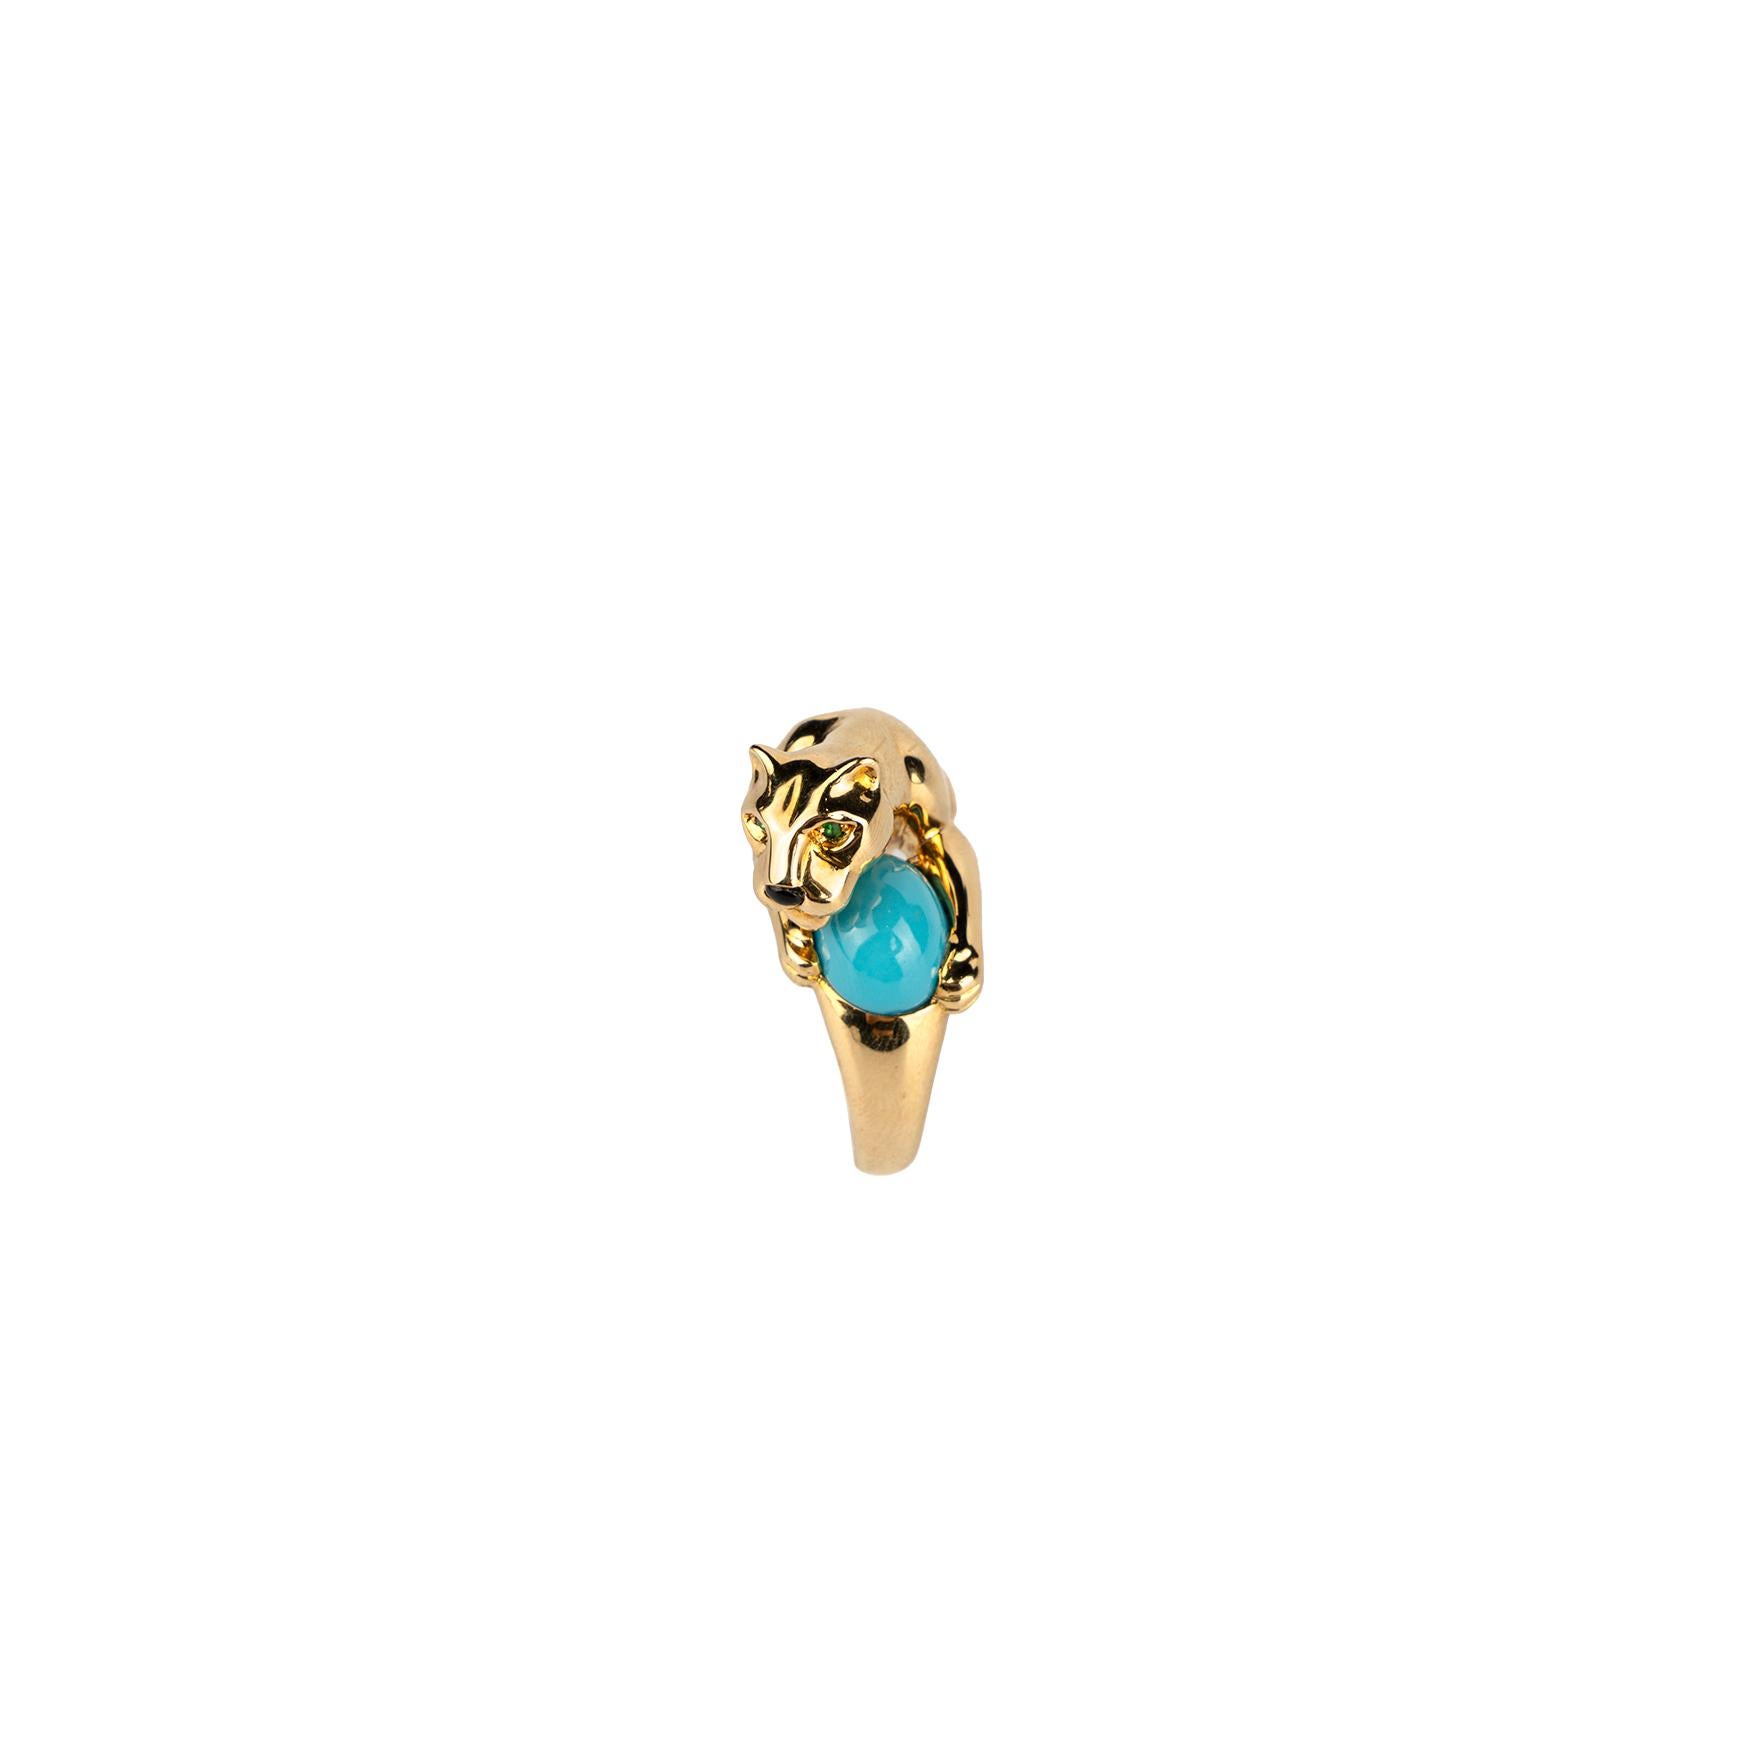 An Iconic Cartier 'Panthère' ring in 18k yellow gold with a turquoise cabochon. Made in France, circa 1990.